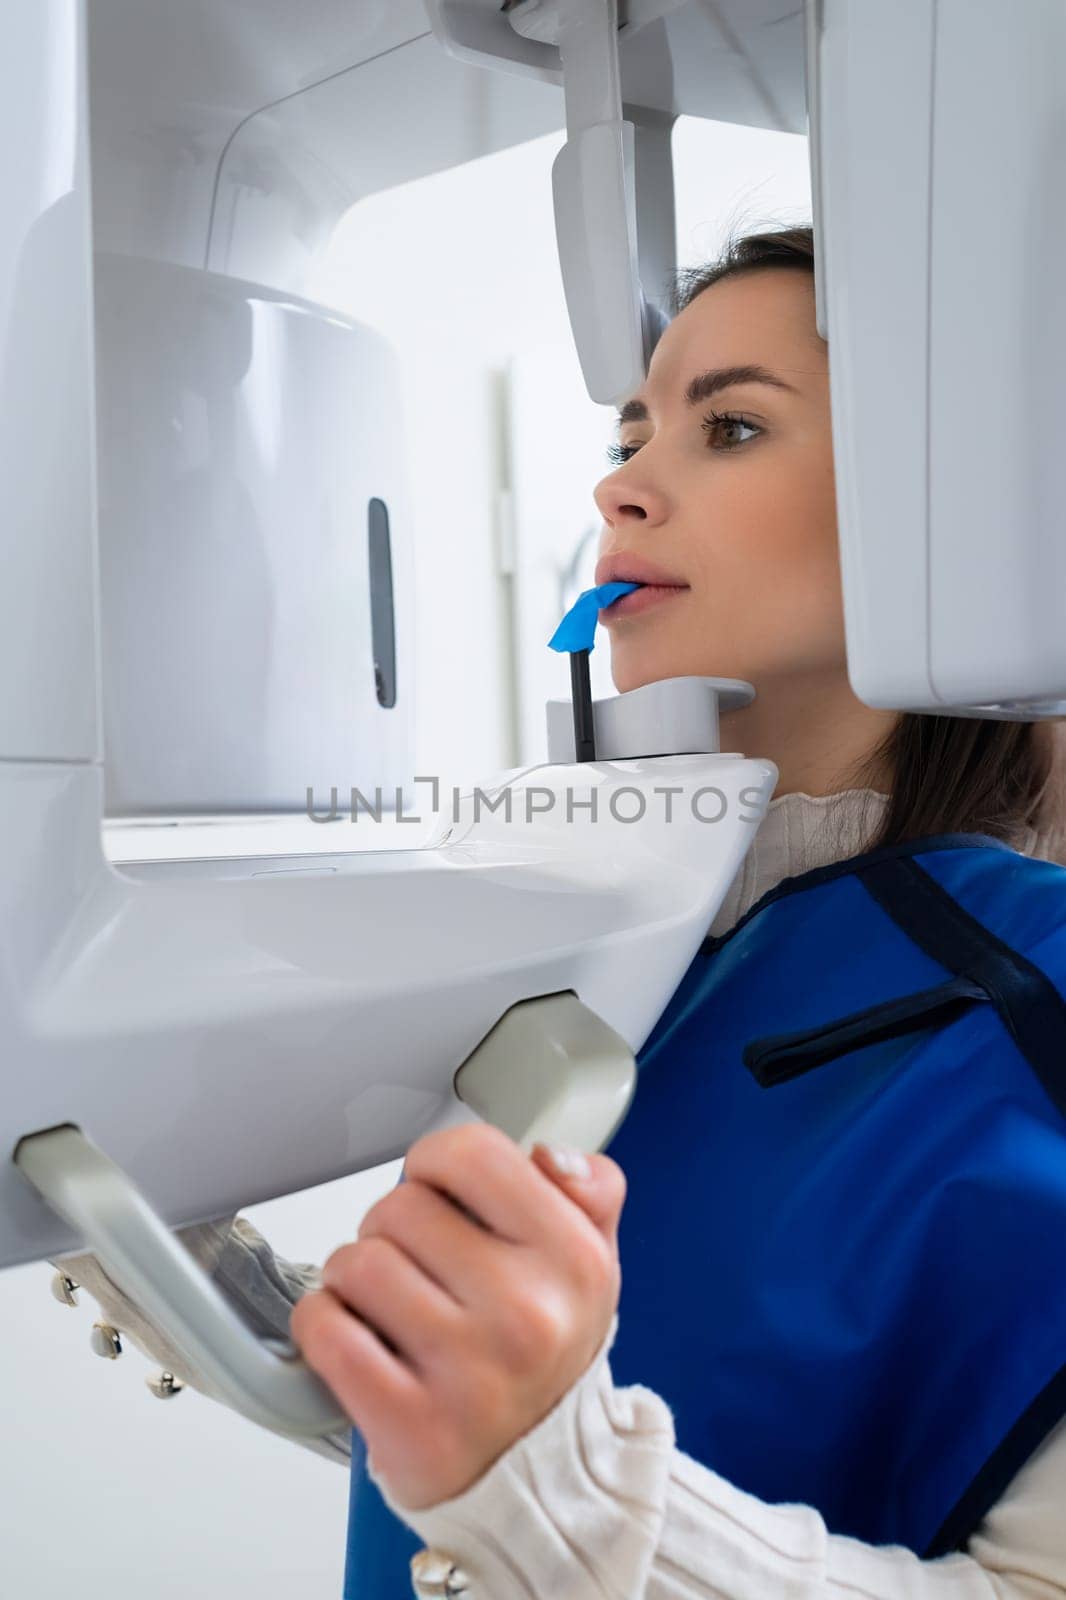 Panoramic Teeth X ray Being Administered to Young Woman at Dental Office. Teeth care.